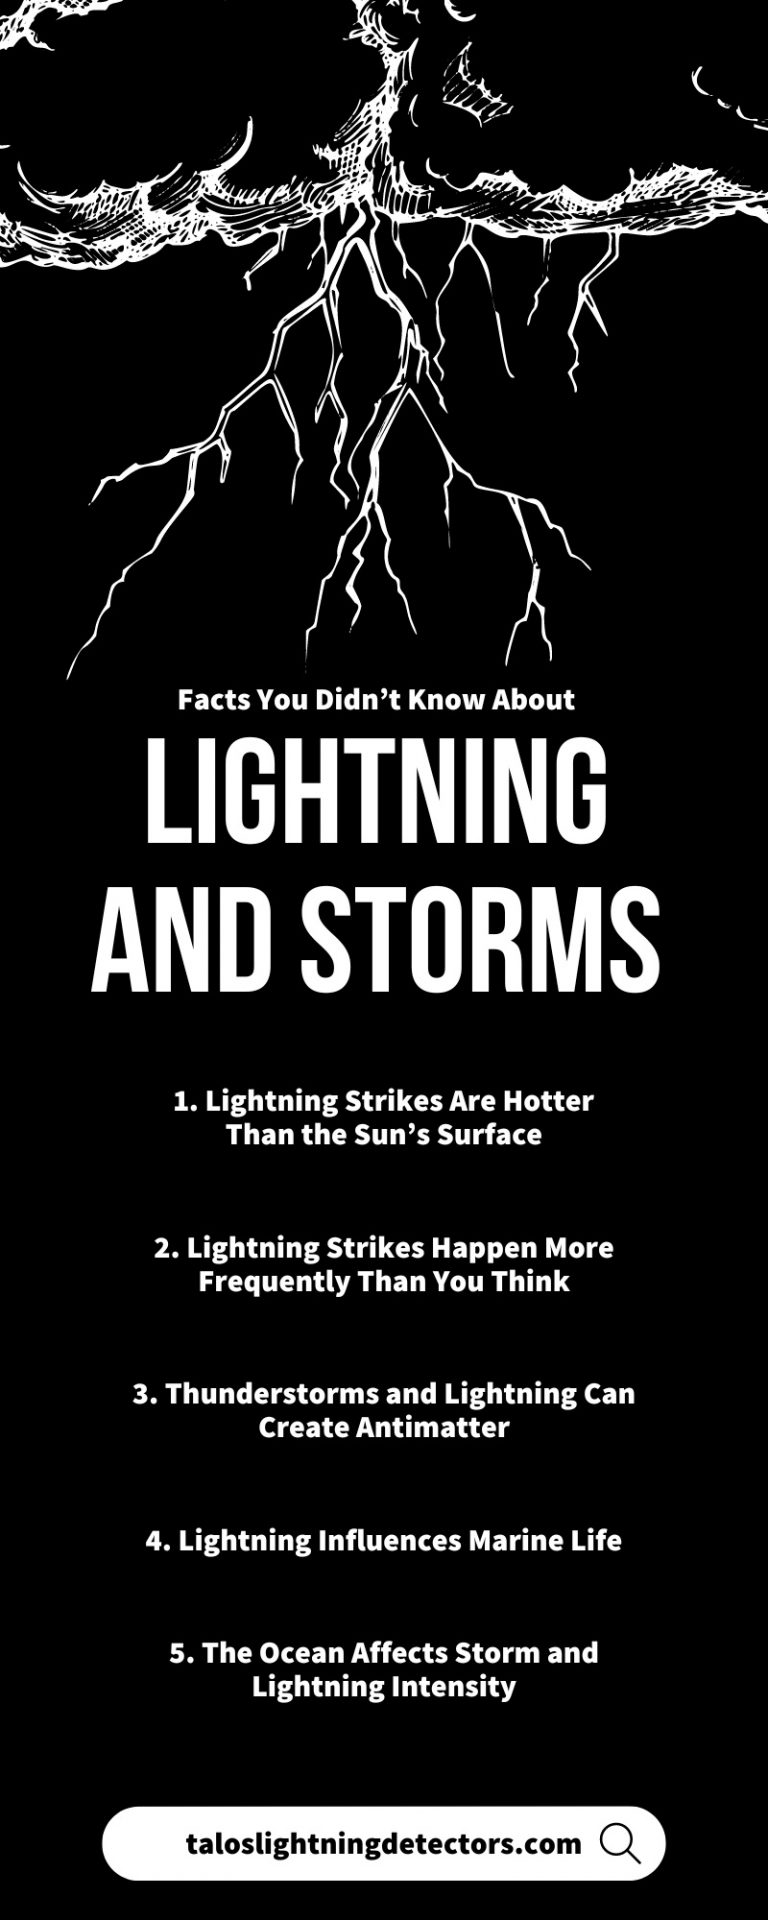 8 Facts You Didn’t Know About Lightning and Storms